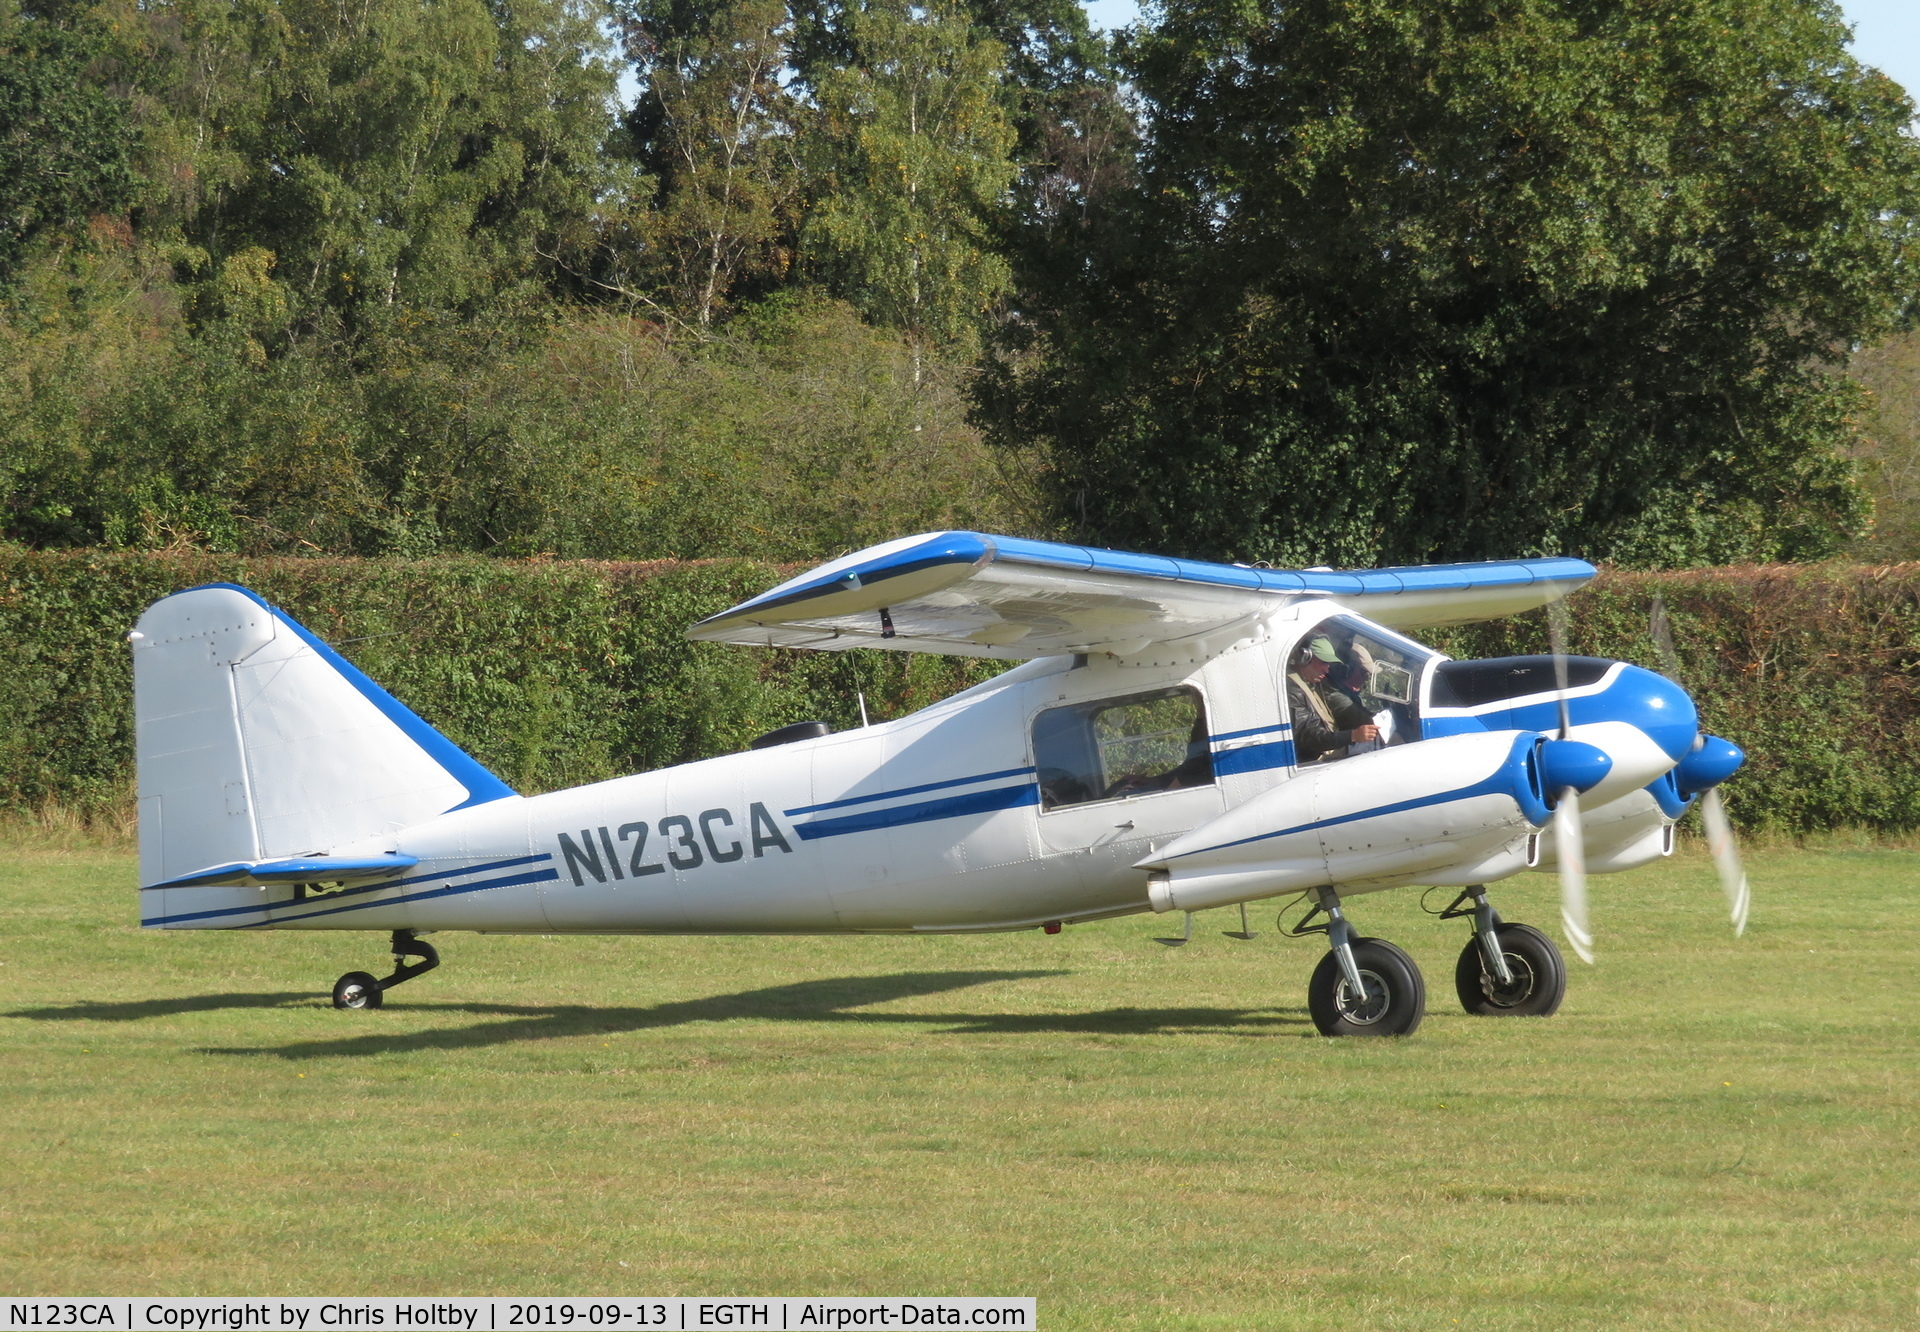 N123CA, 1964 Dornier Do-28A-1 C/N 3051, 1964 Dornier 28A ready to roll for take-off at Old Warden